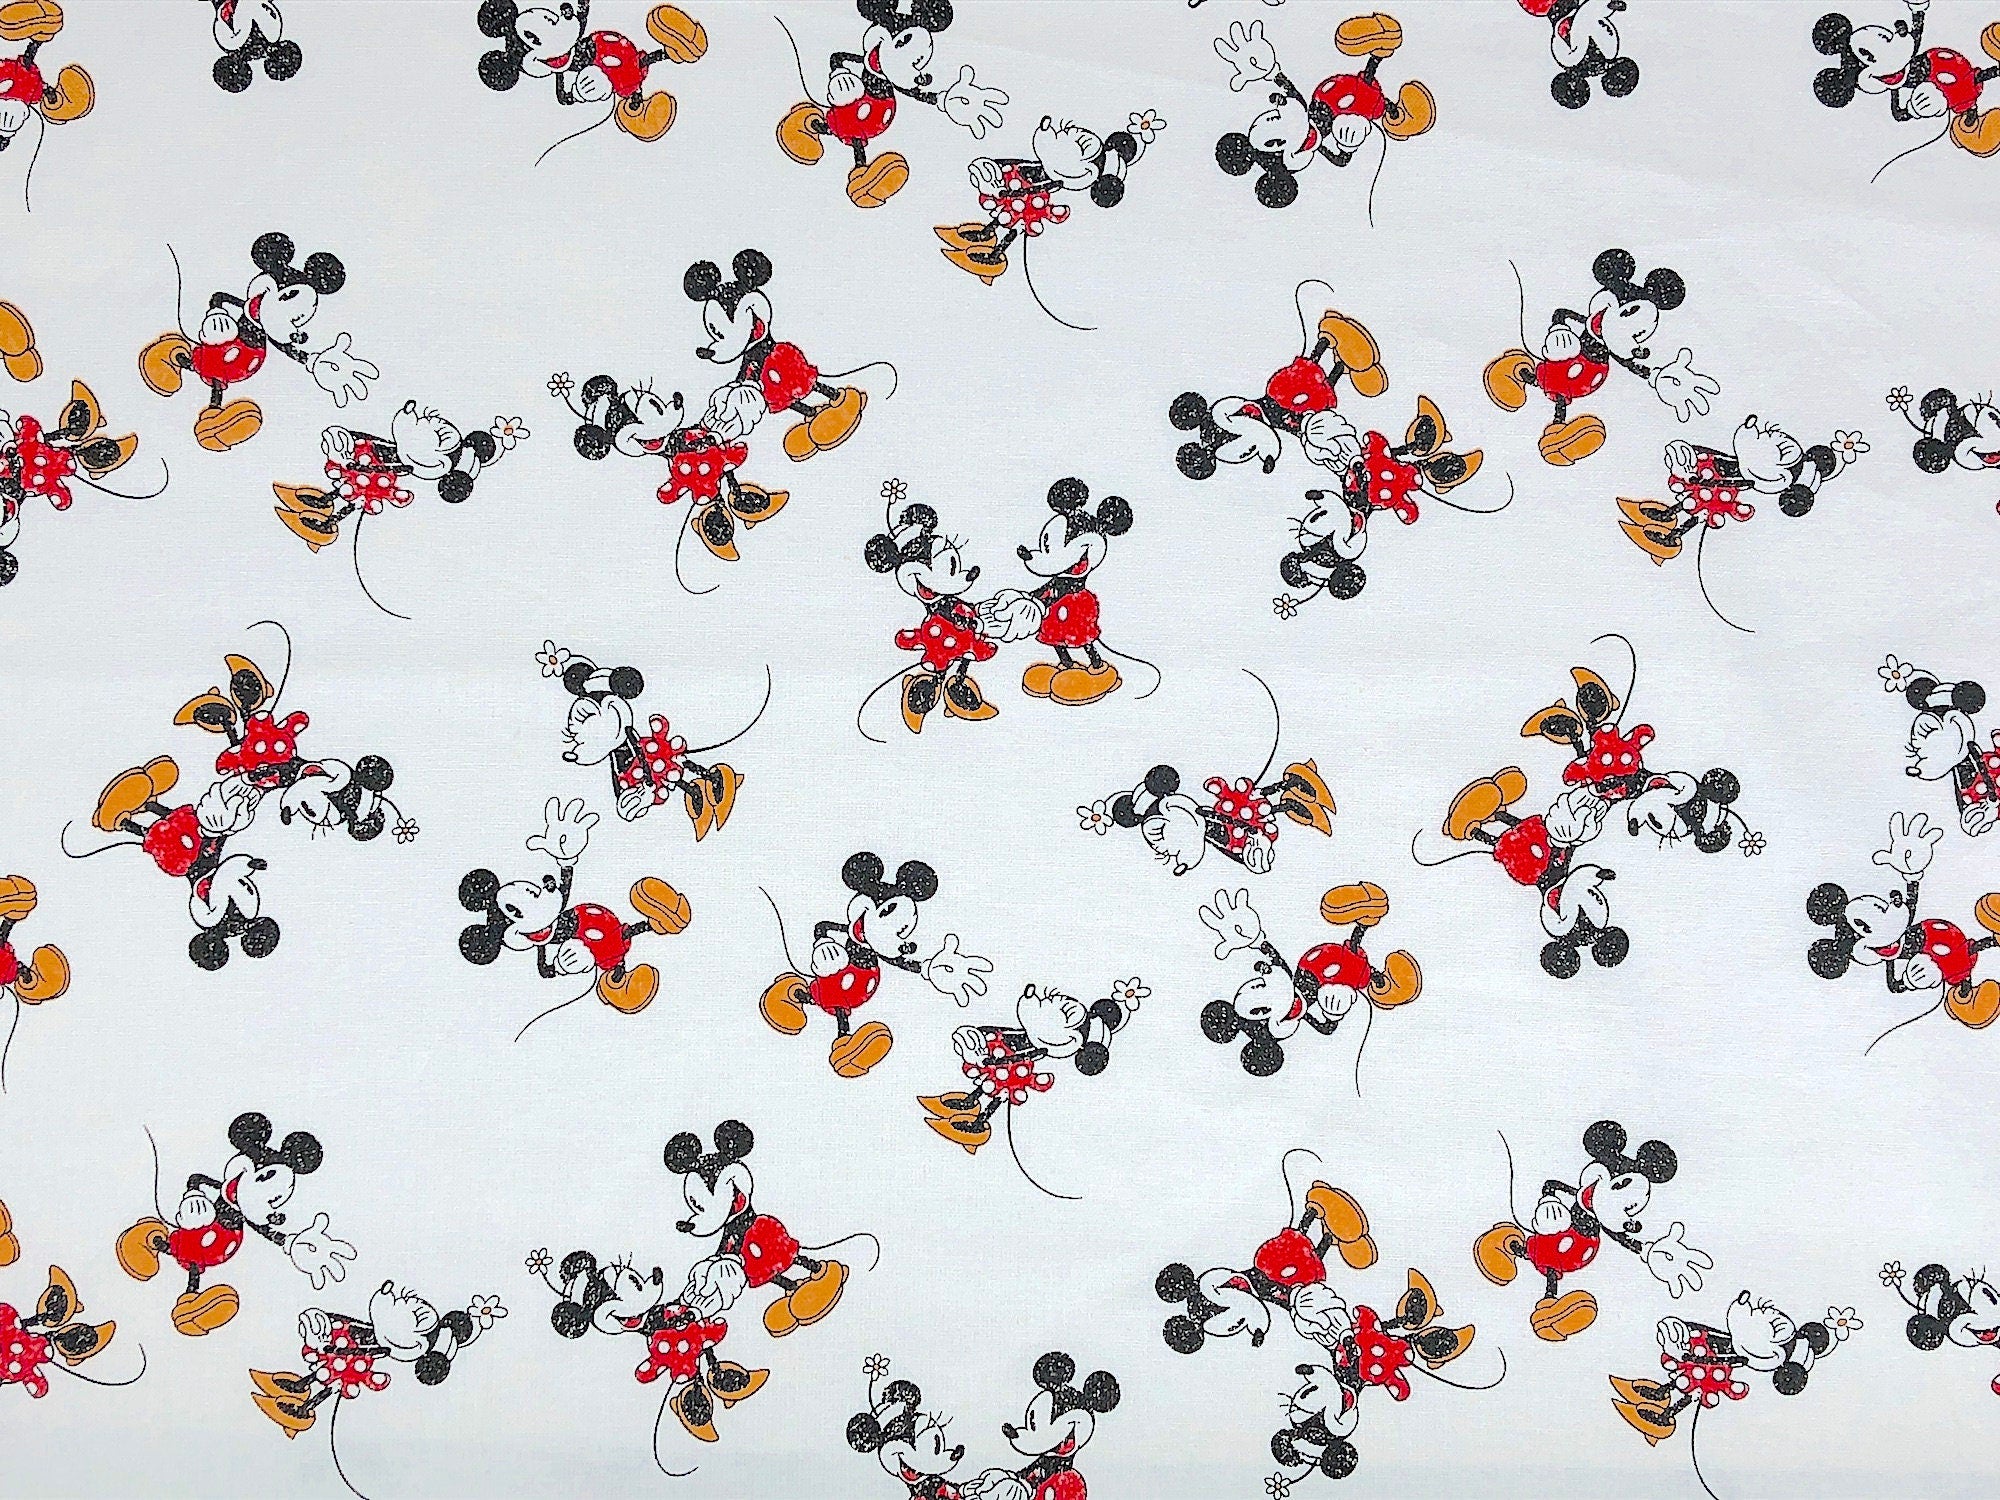 This fabric is called Mickey Minnie Scattered. This white fabric is covered with Mickey and Minnie Mouse